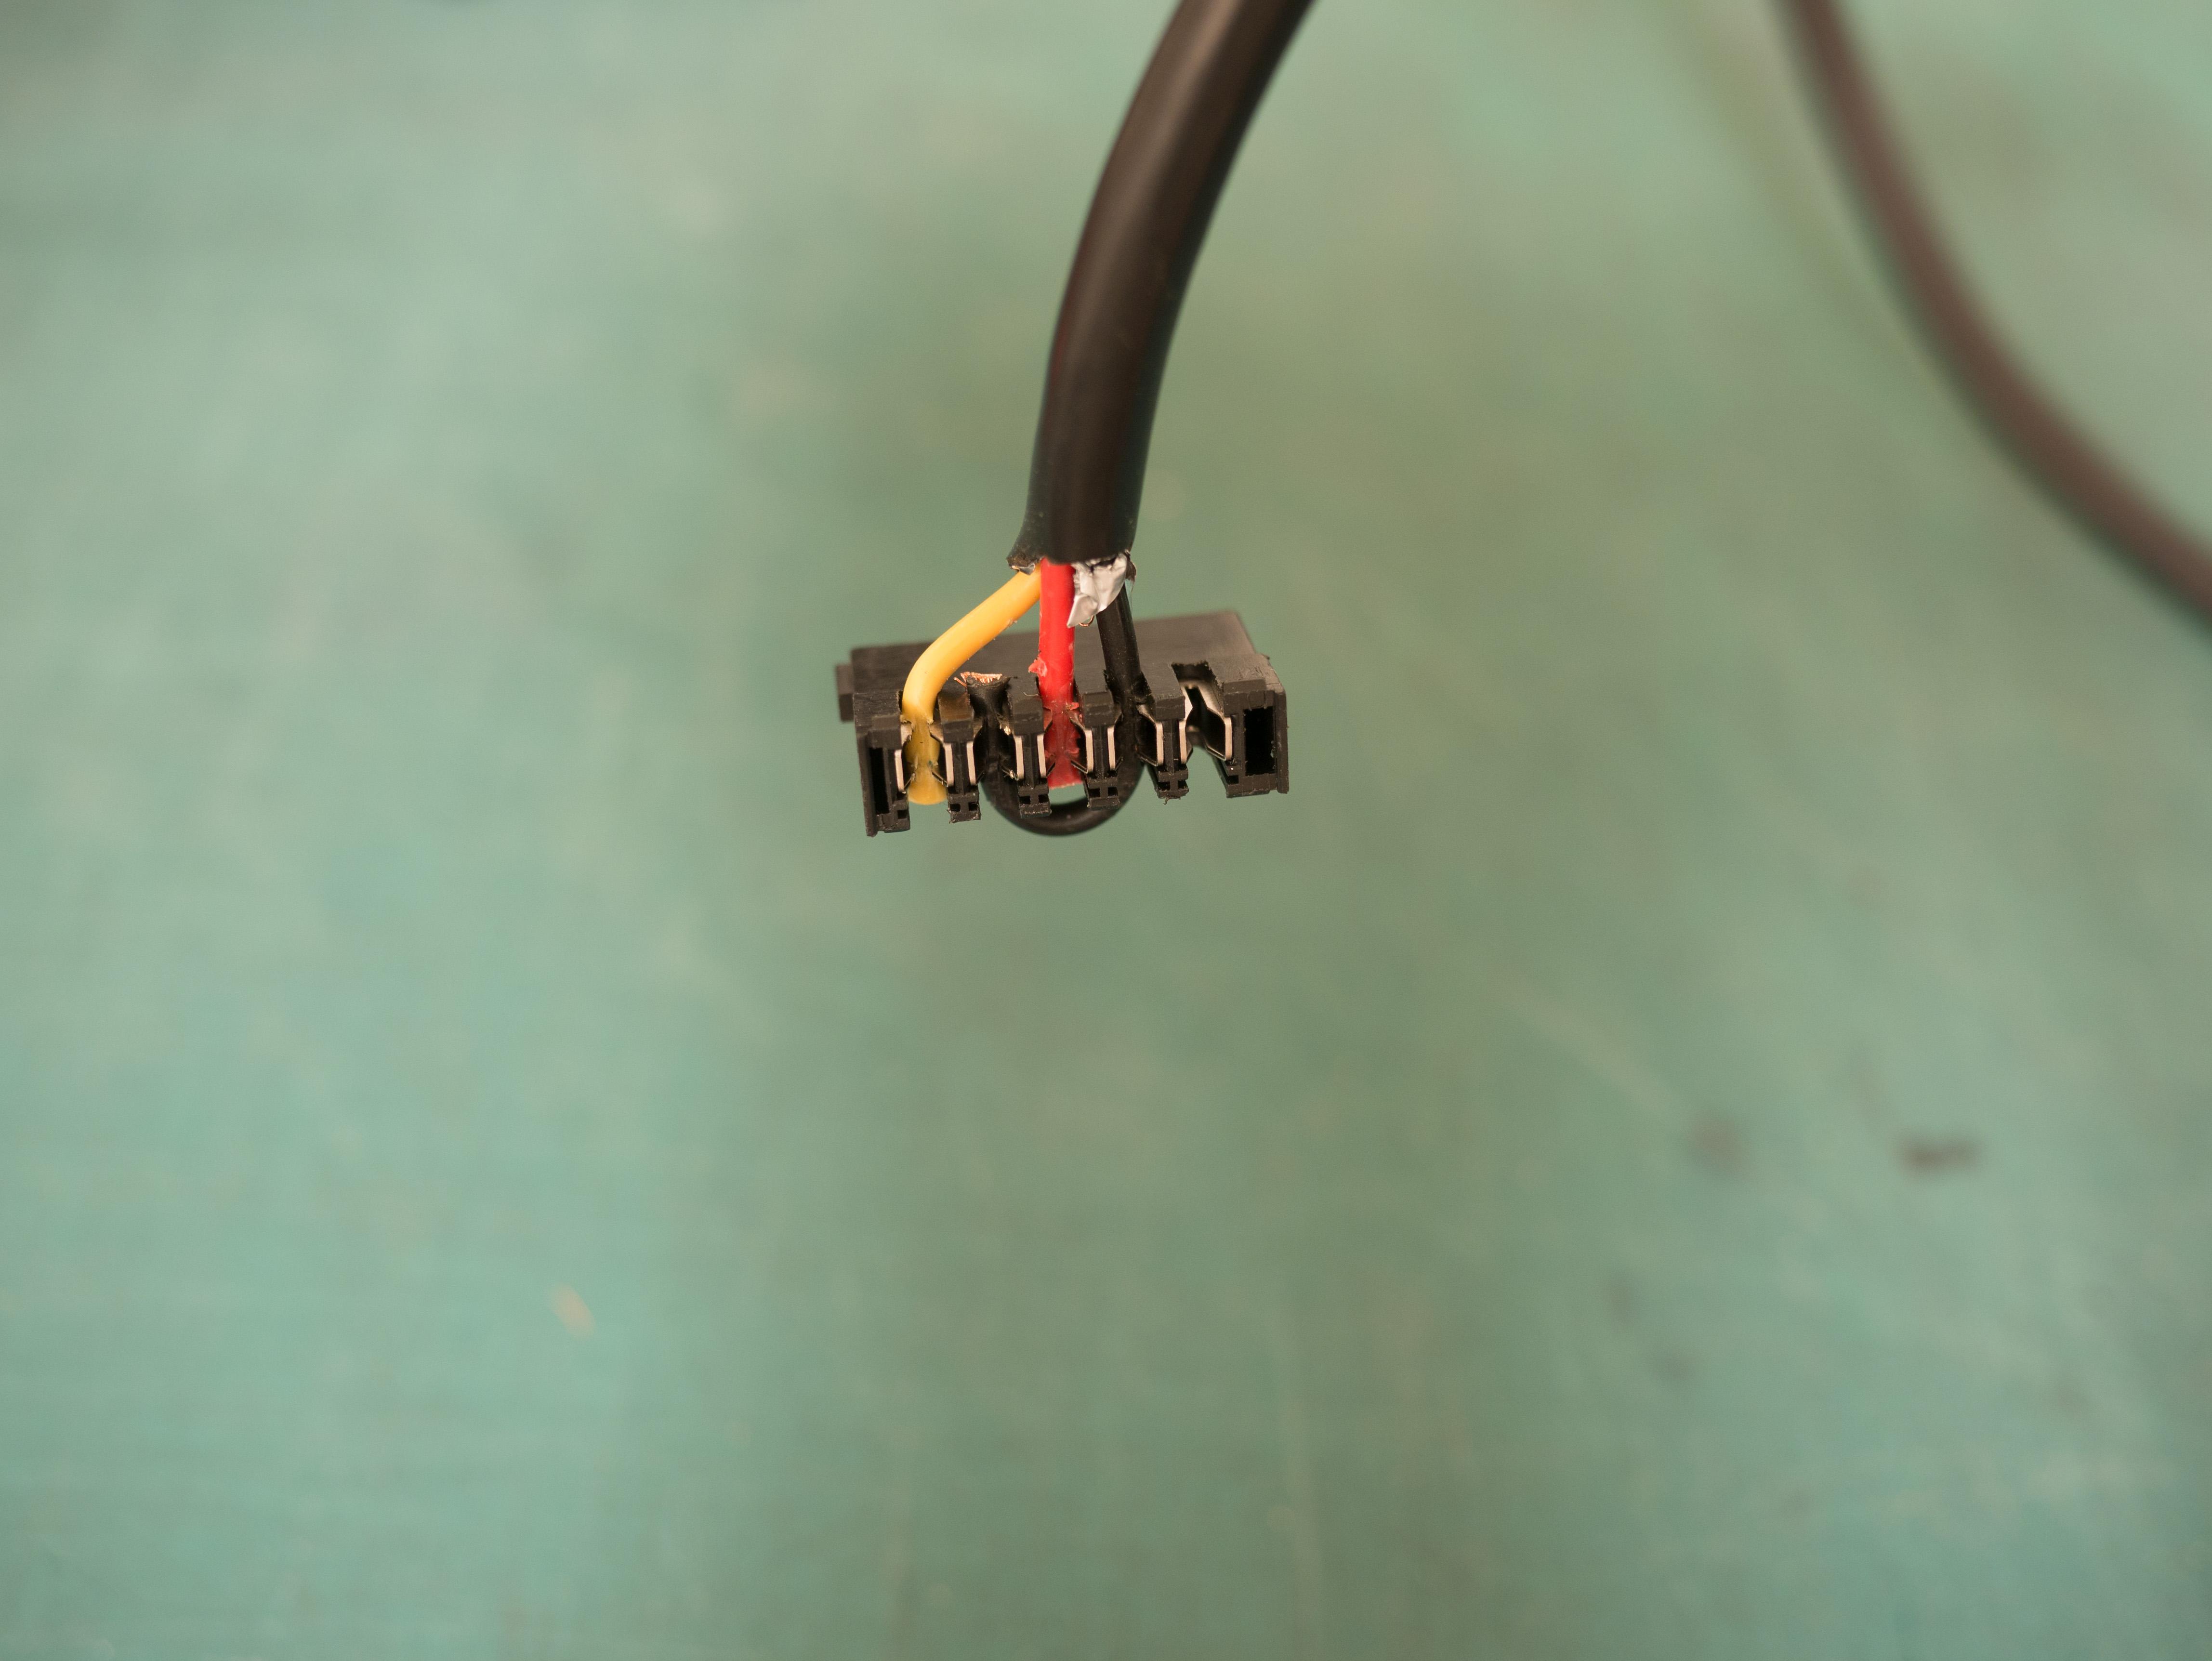 Wires connected to SATA power cable